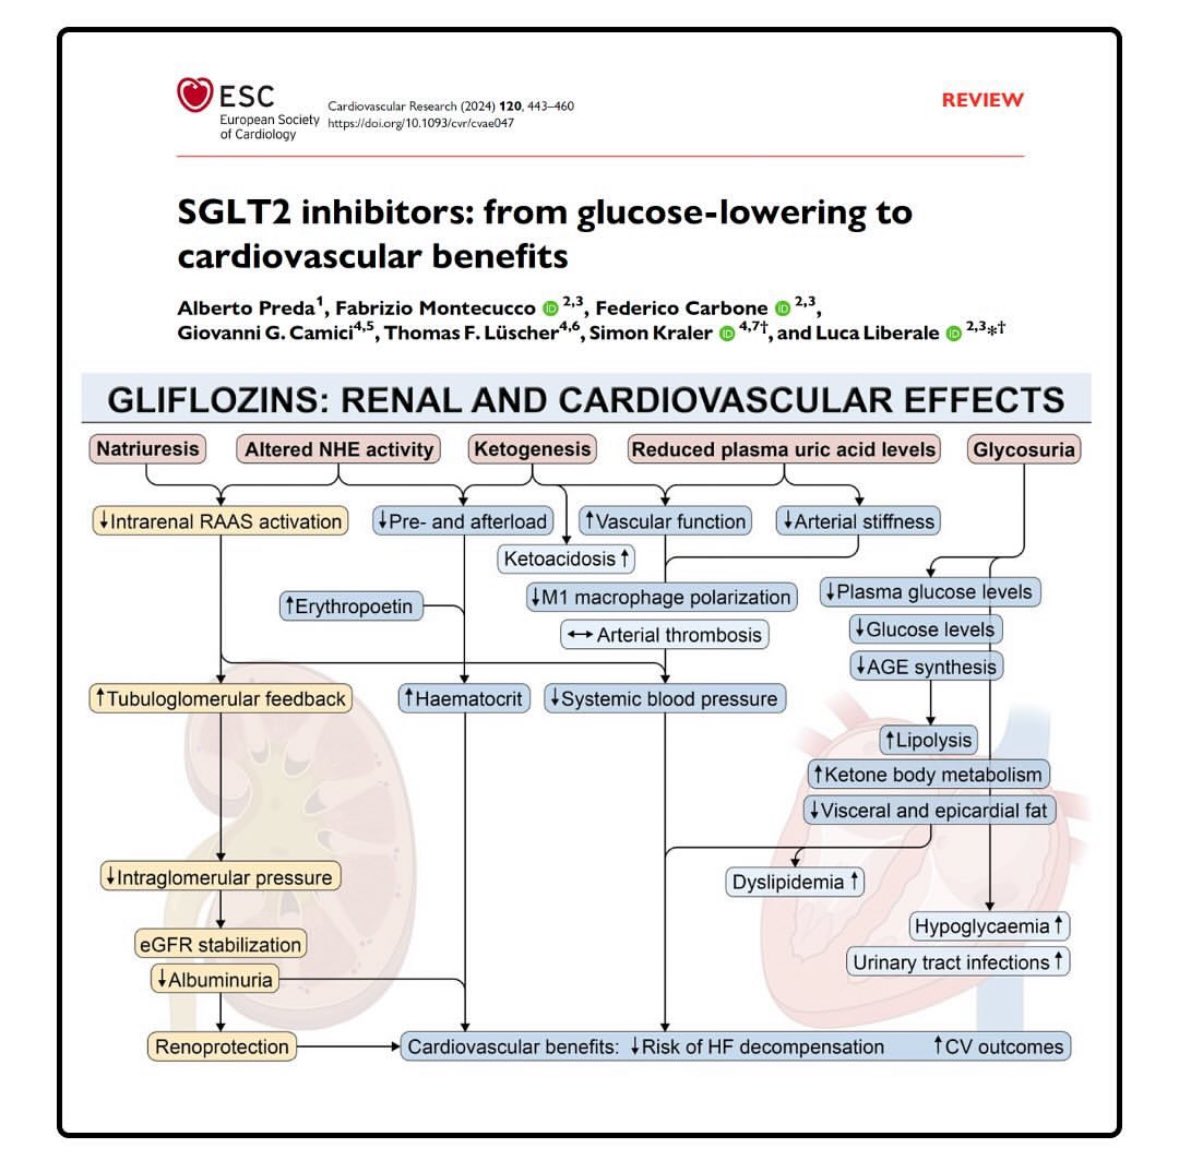 Cardioprotective effects of SGLT inhibition 🫀 Mechanisms of action 📚